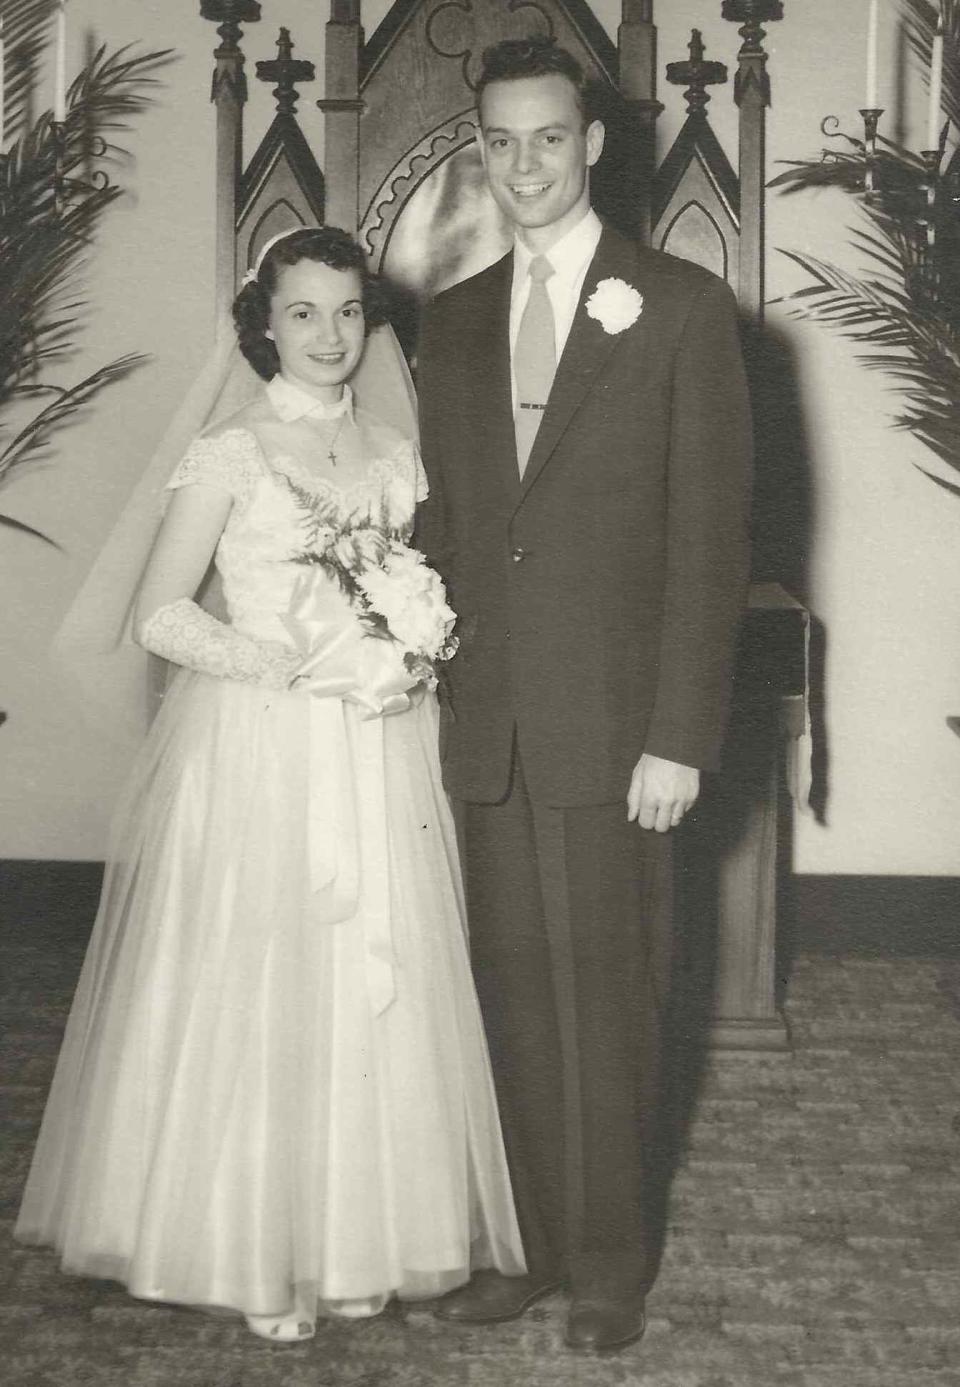 The couple in 1953.